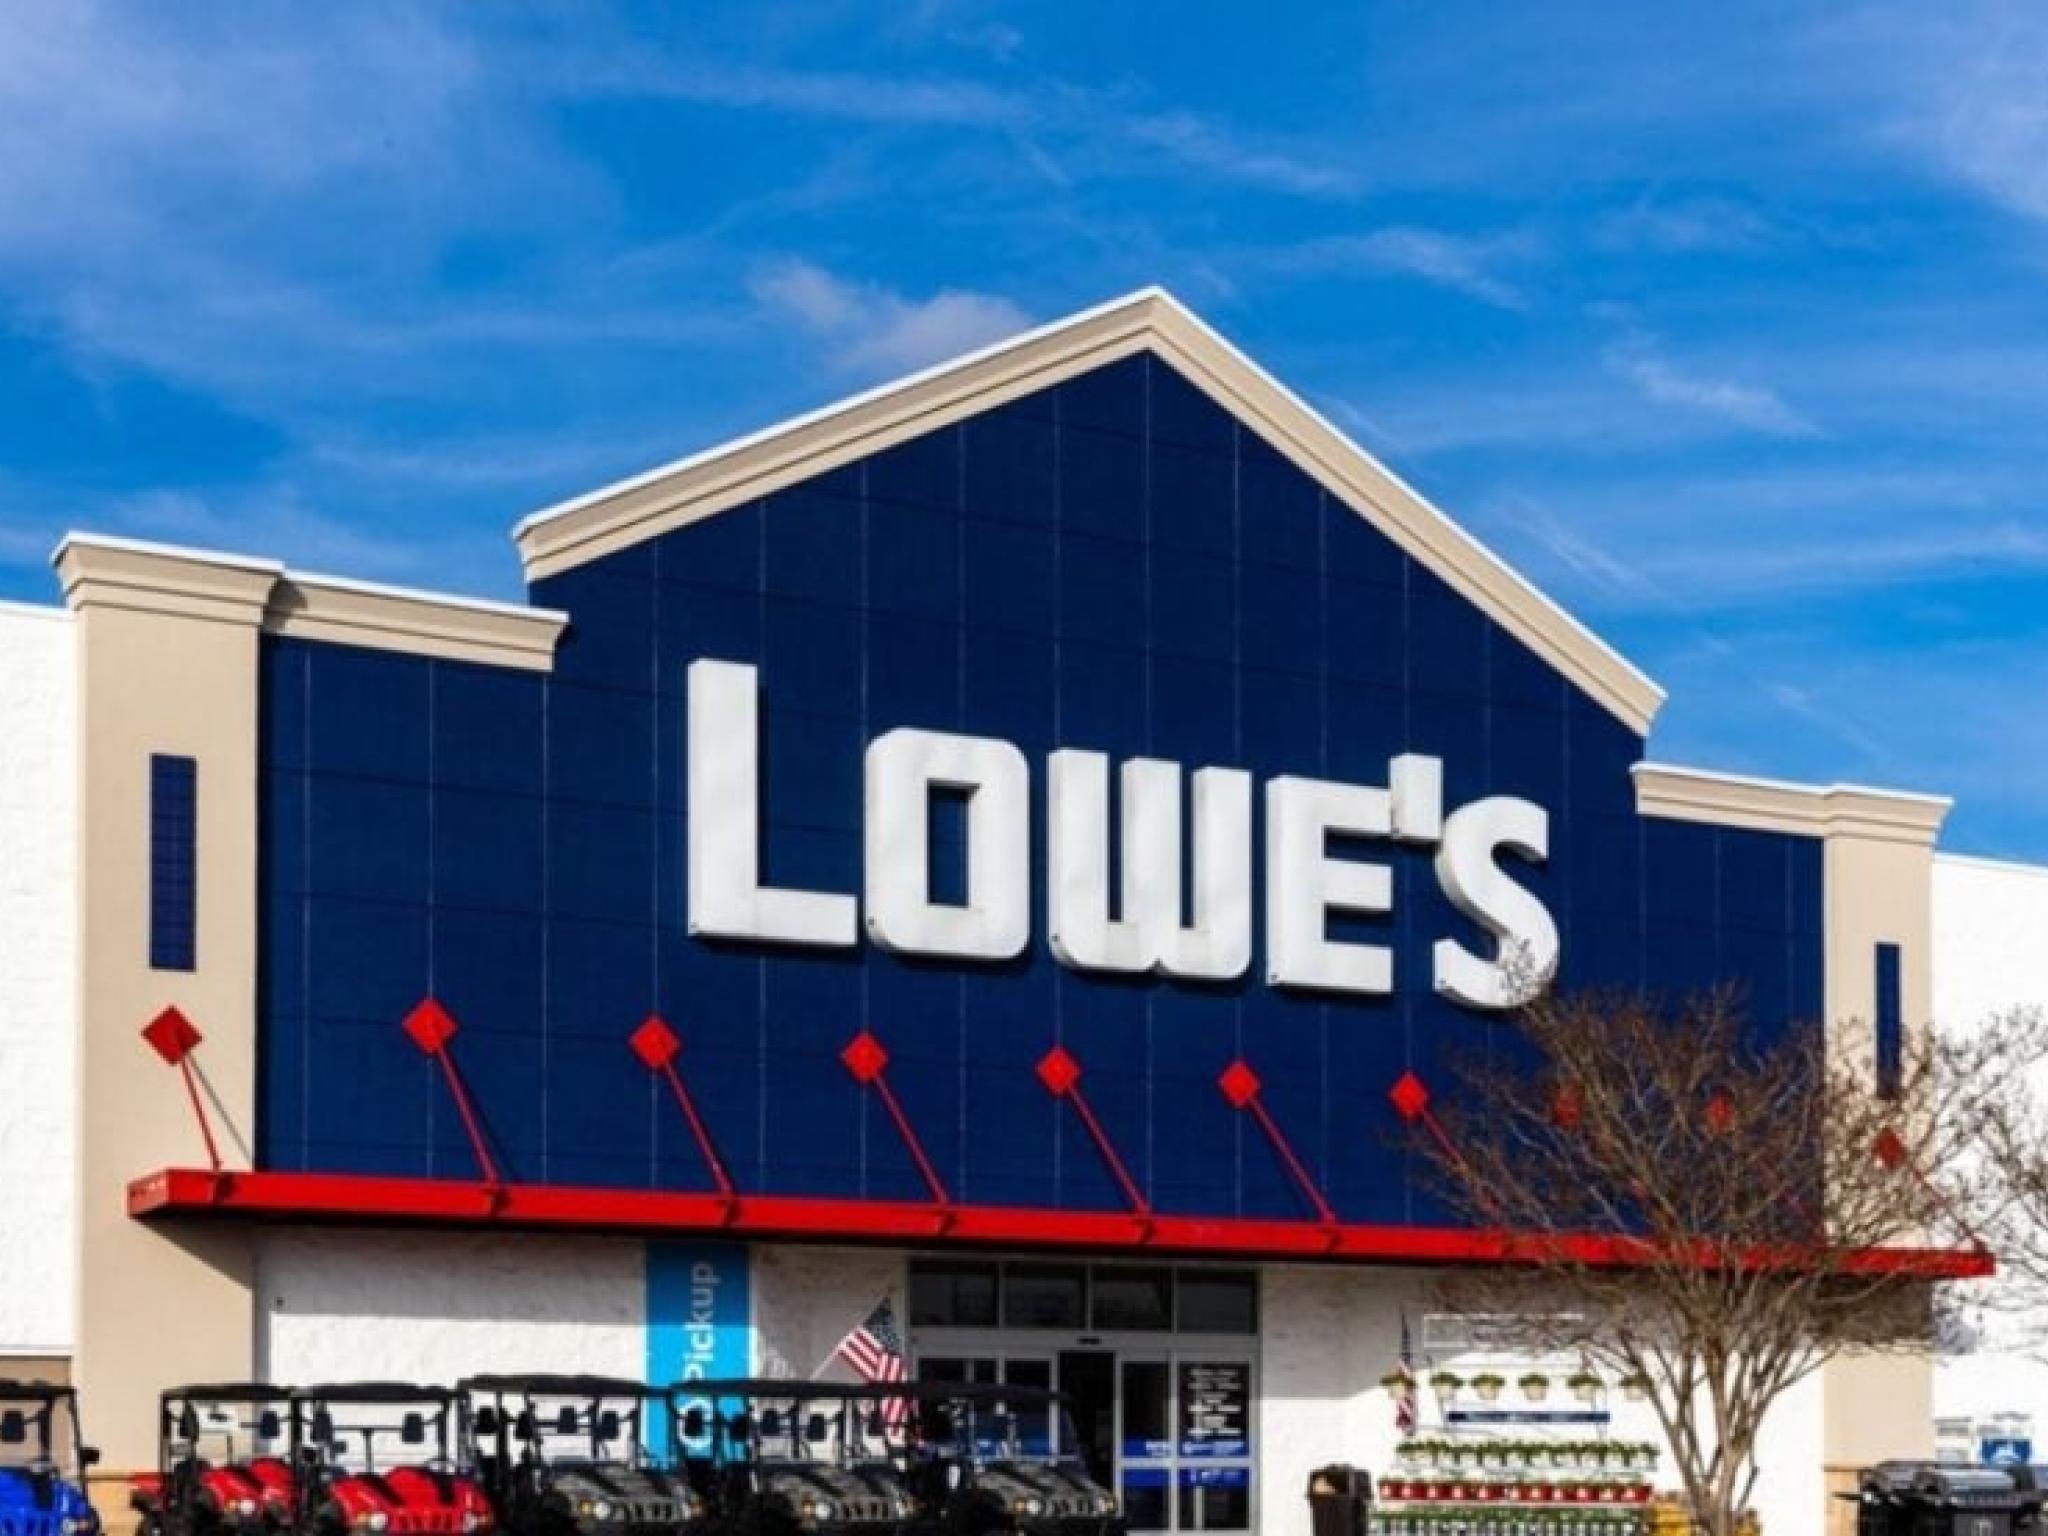  whats-going-on-with-home-retailer-lowes-shares-after-raising-dividend-by-5 